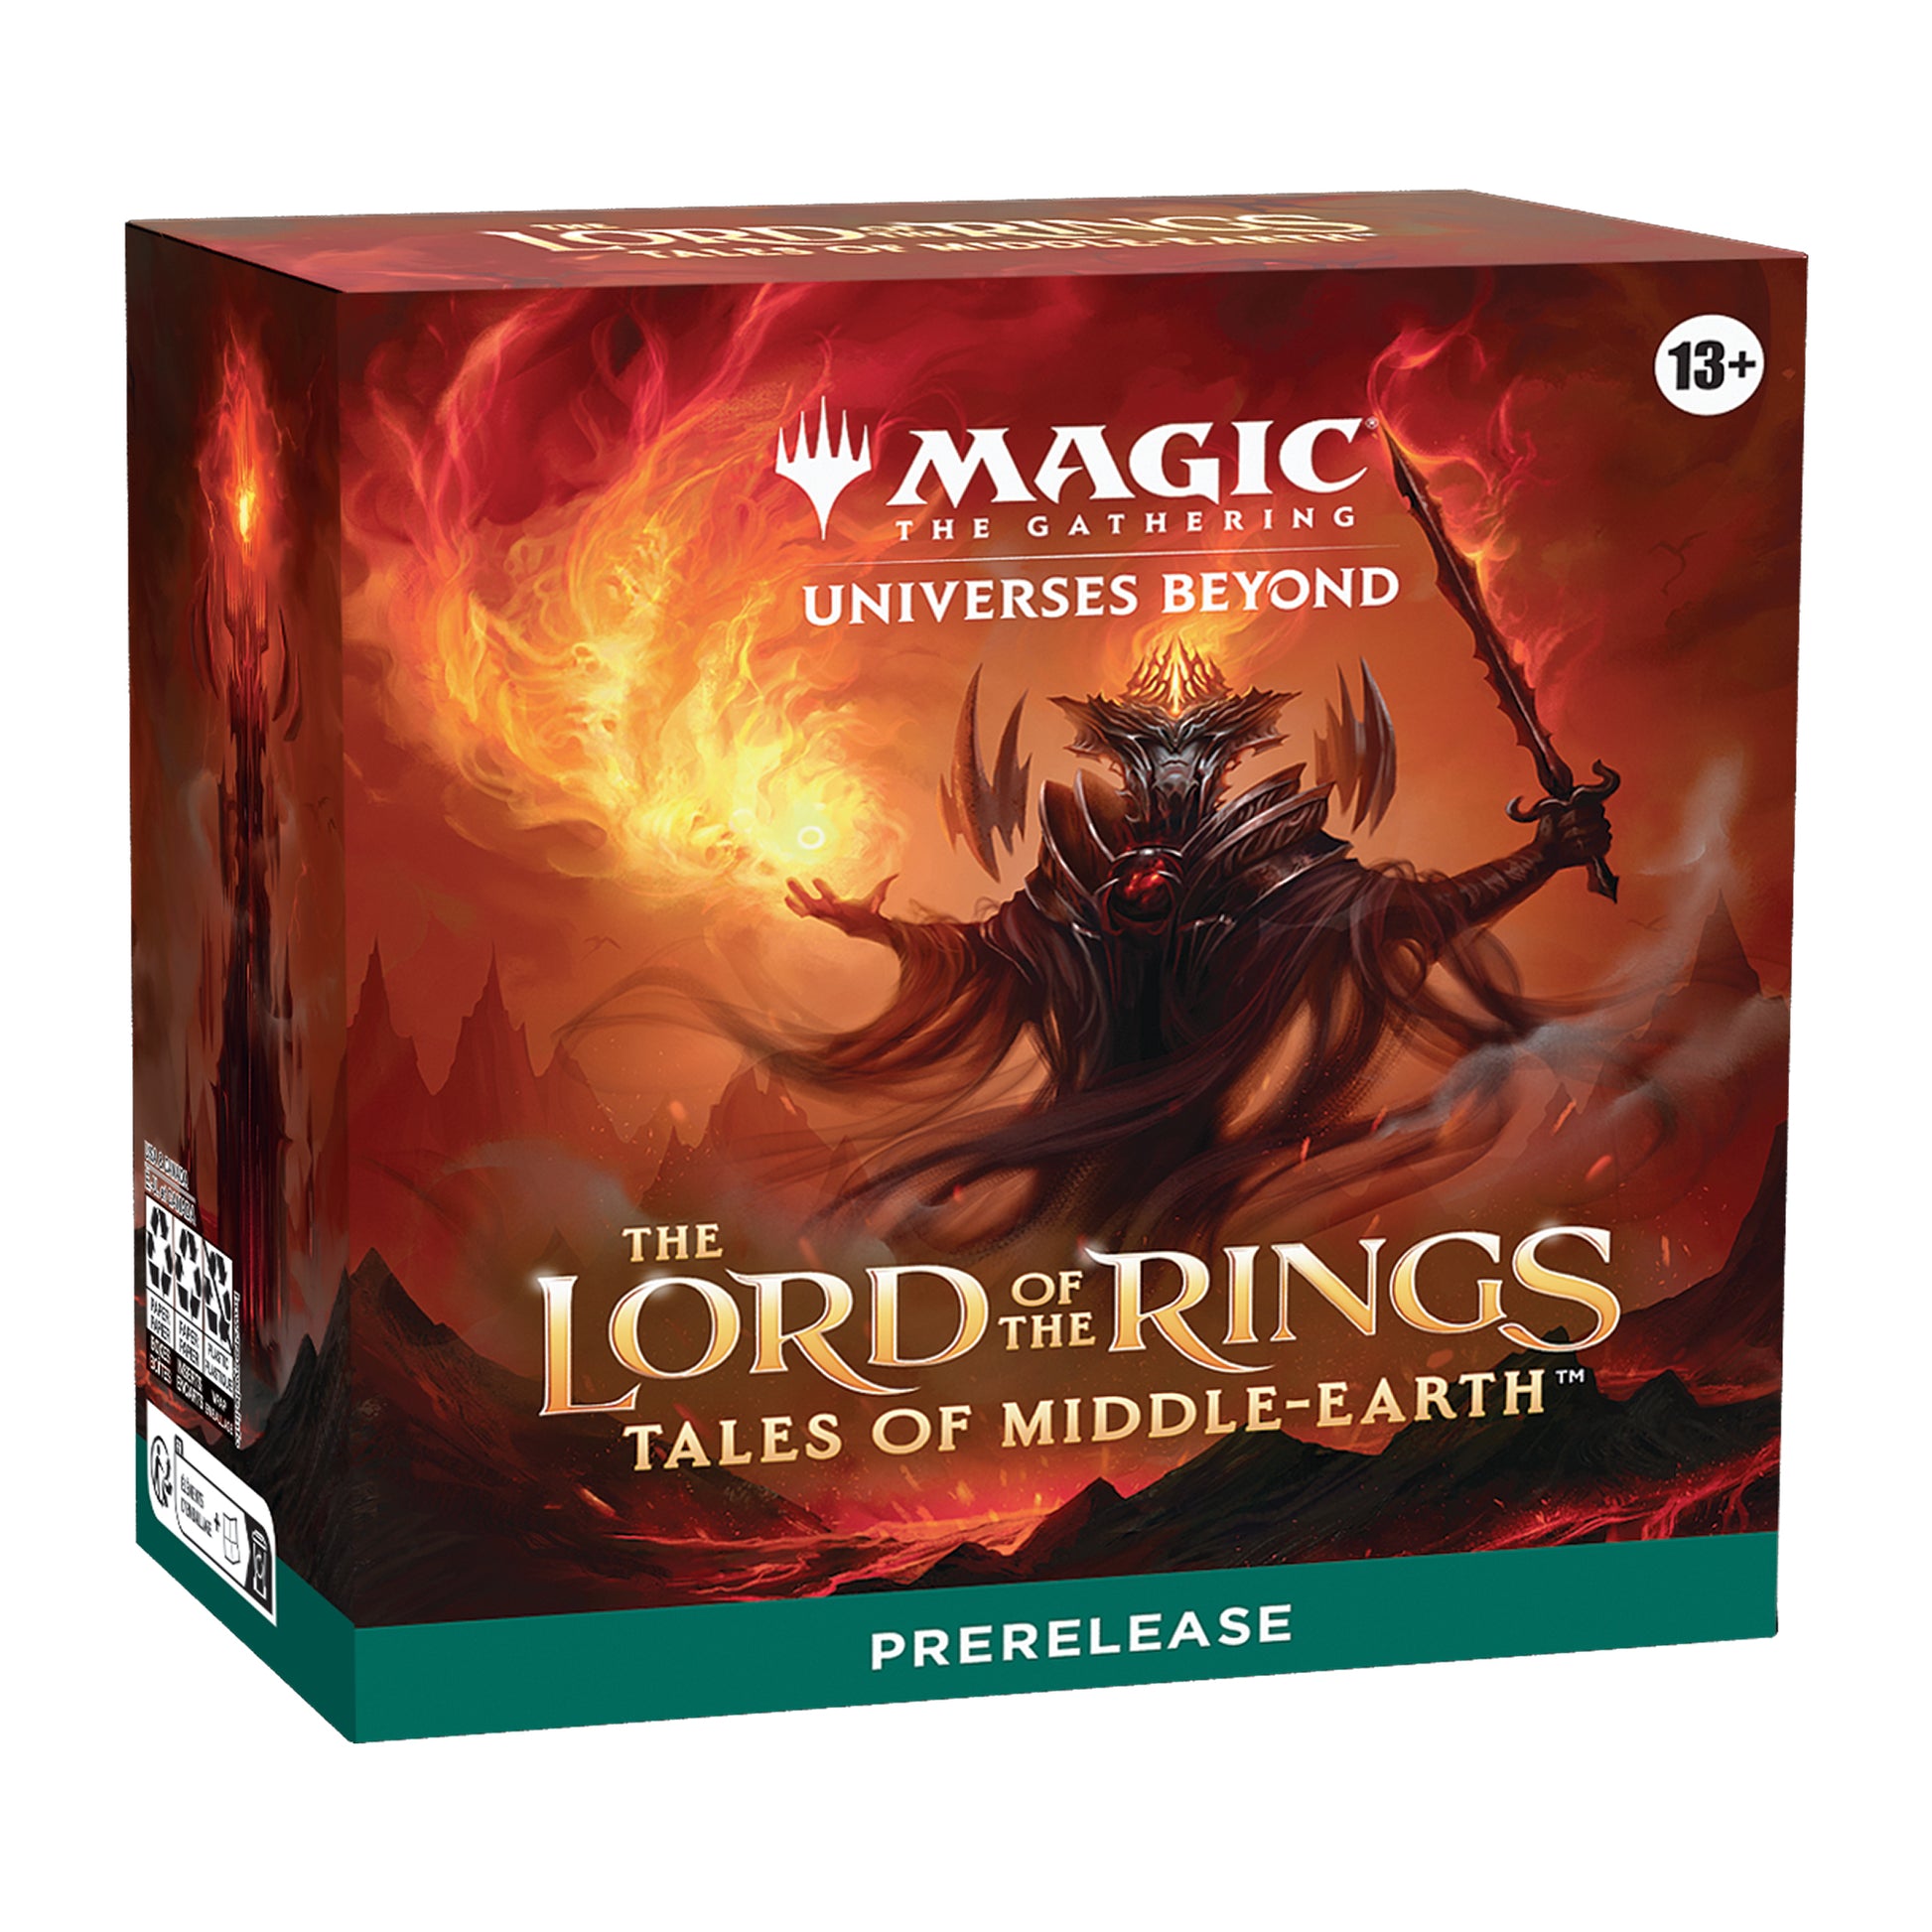 Magic the Gathering: Lord of the Rings - Tales of Middle-earth Prerelease Kit box cover art.